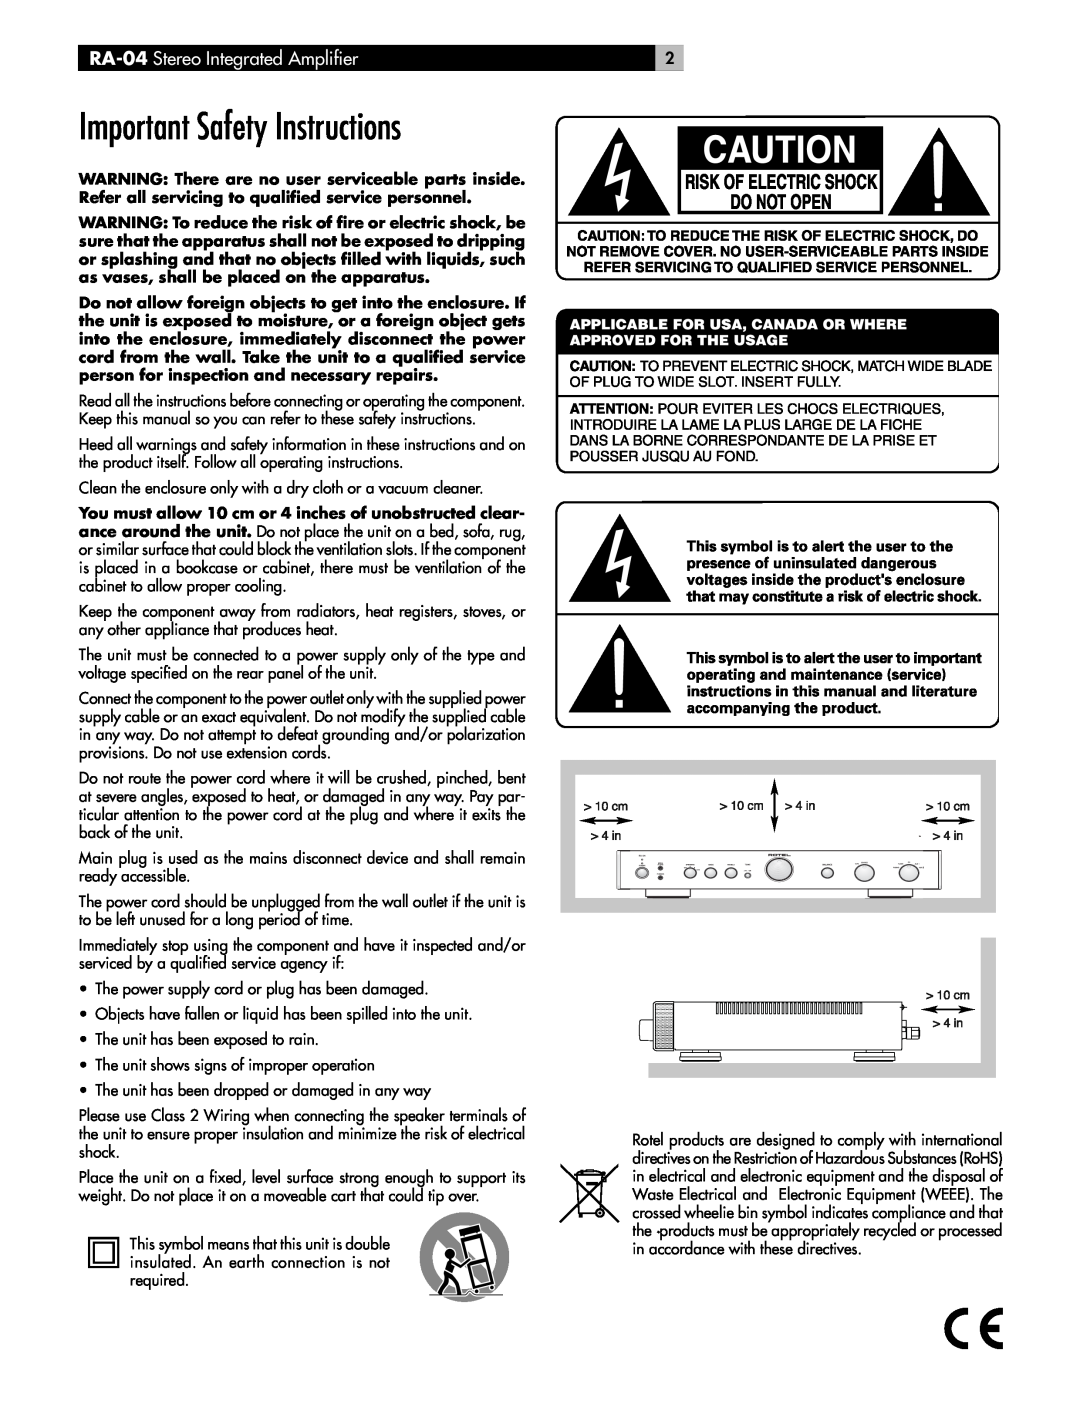 Rotel owner manual Important Safety Instructions, RA-04 Stereo Integrated Amplifier 